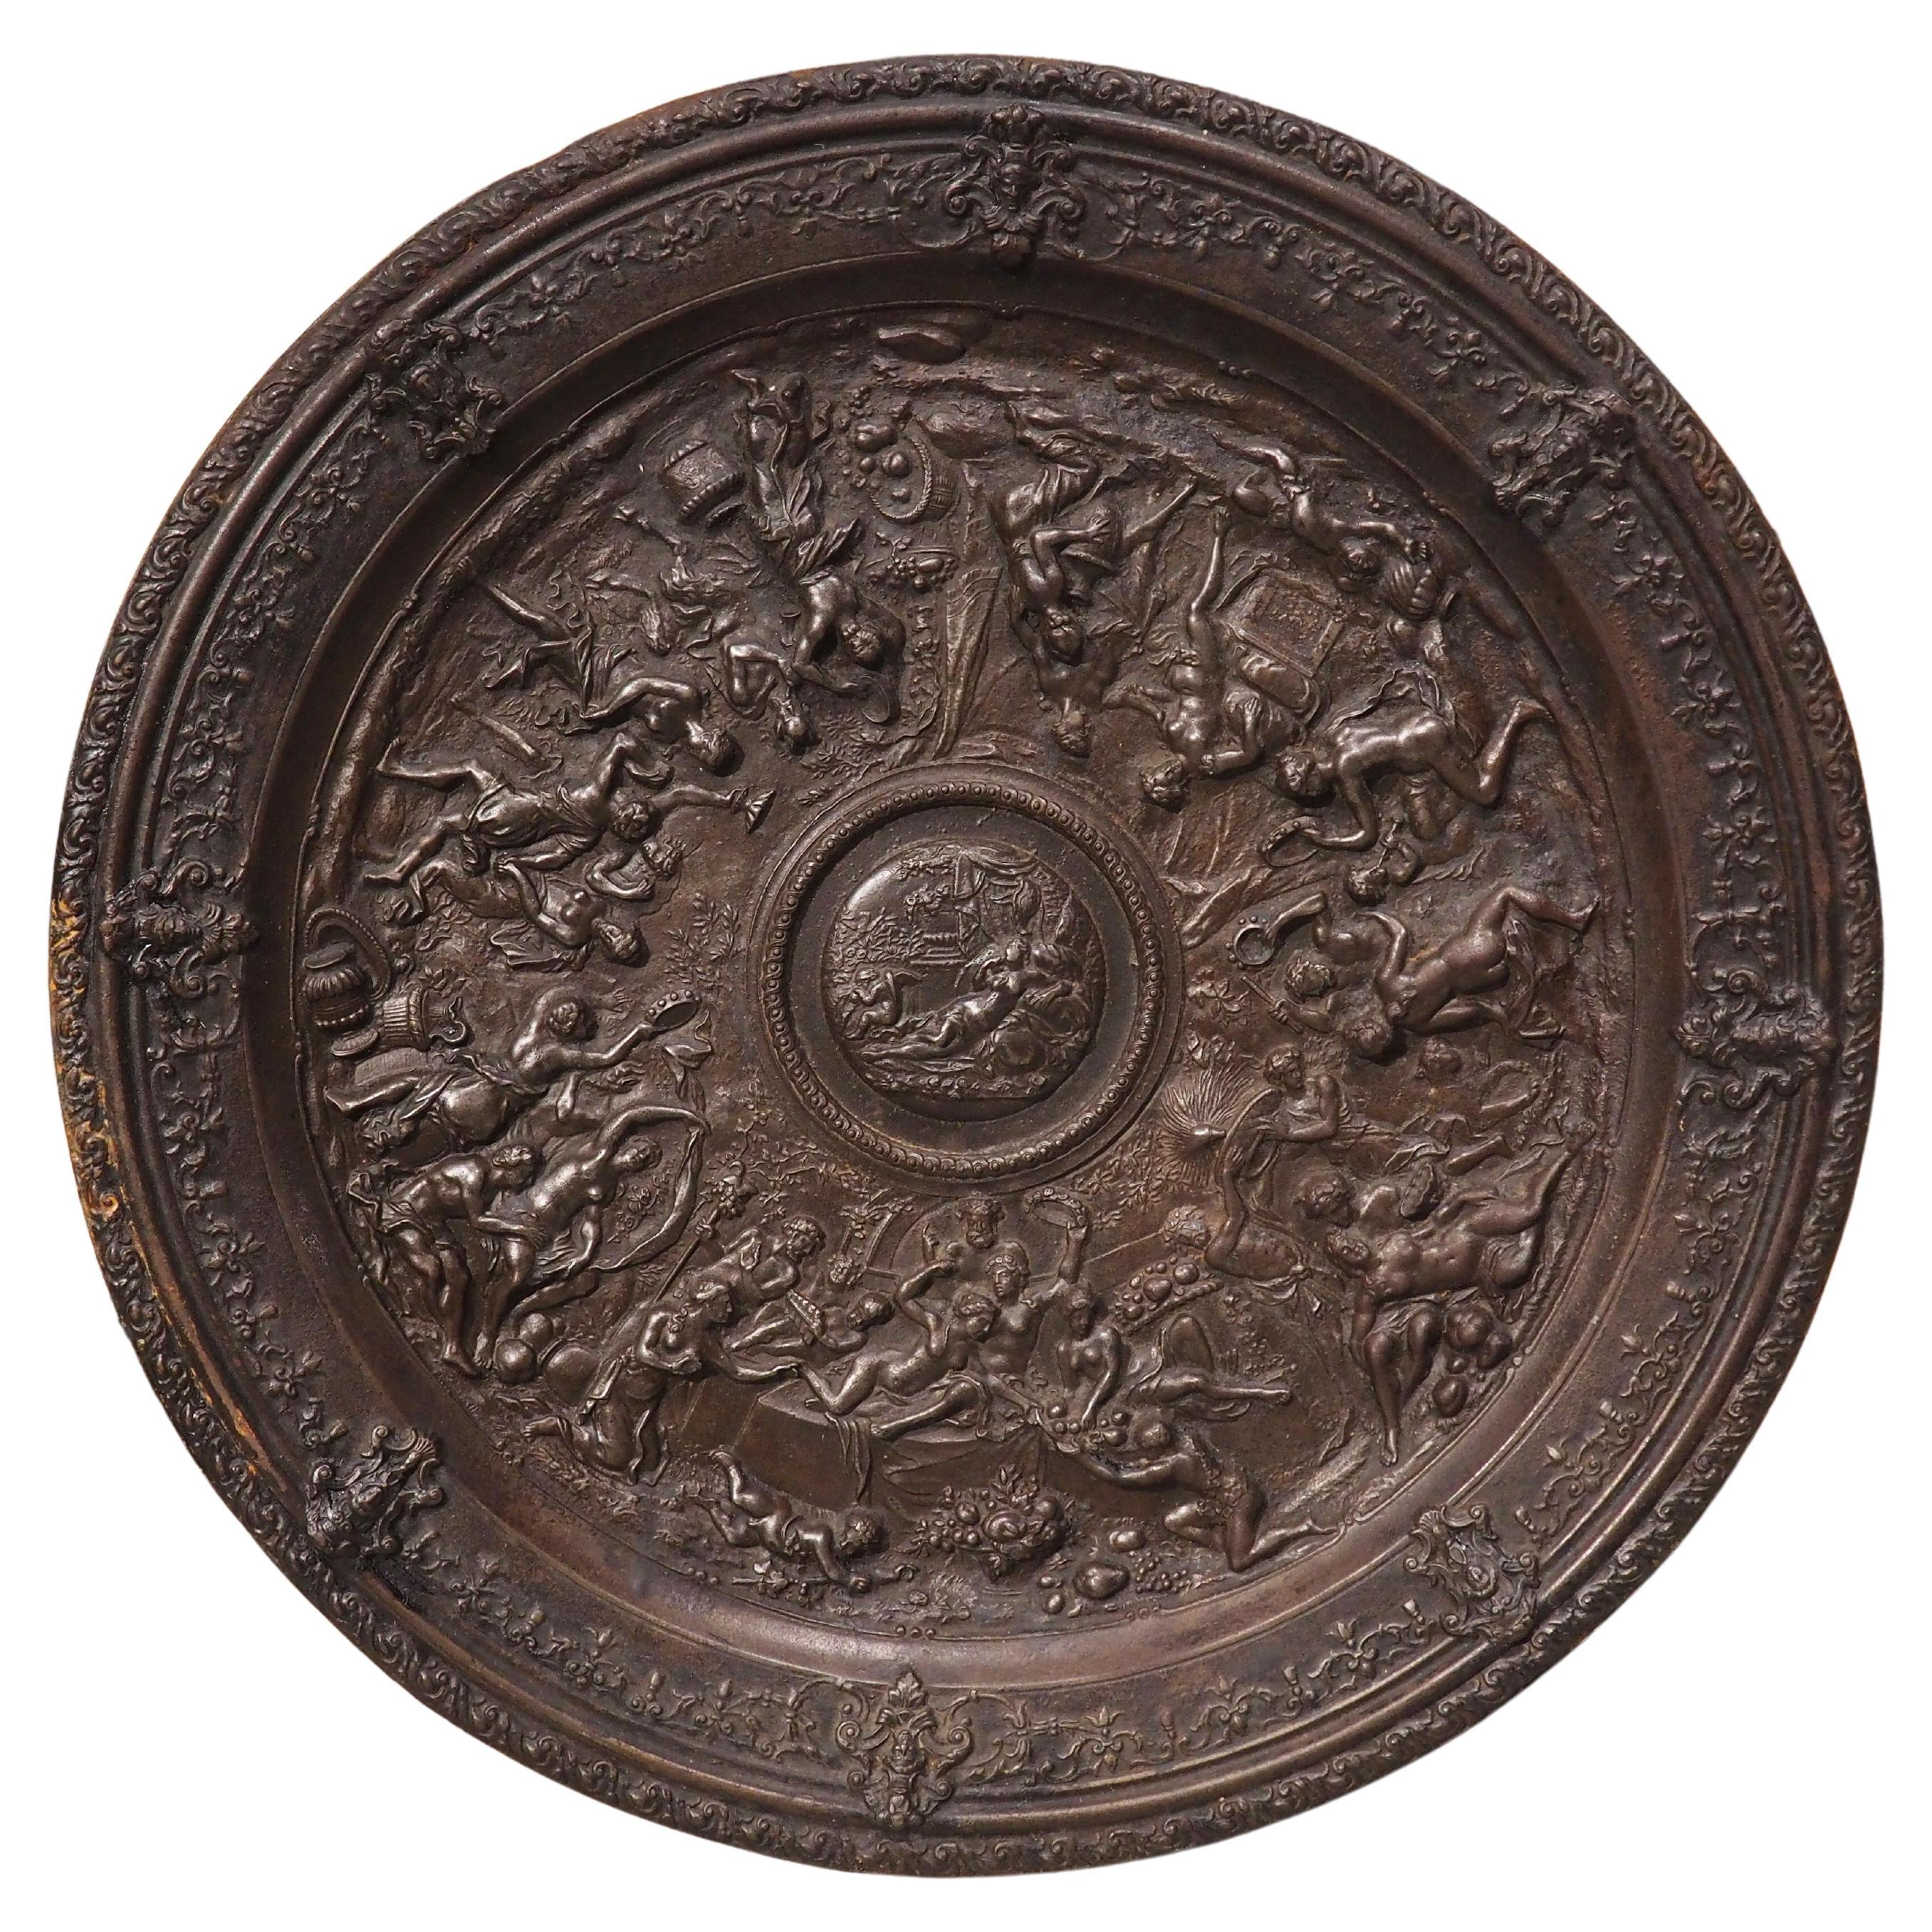 Antique Cast Iron Relief Charger from Germany, 19th Century